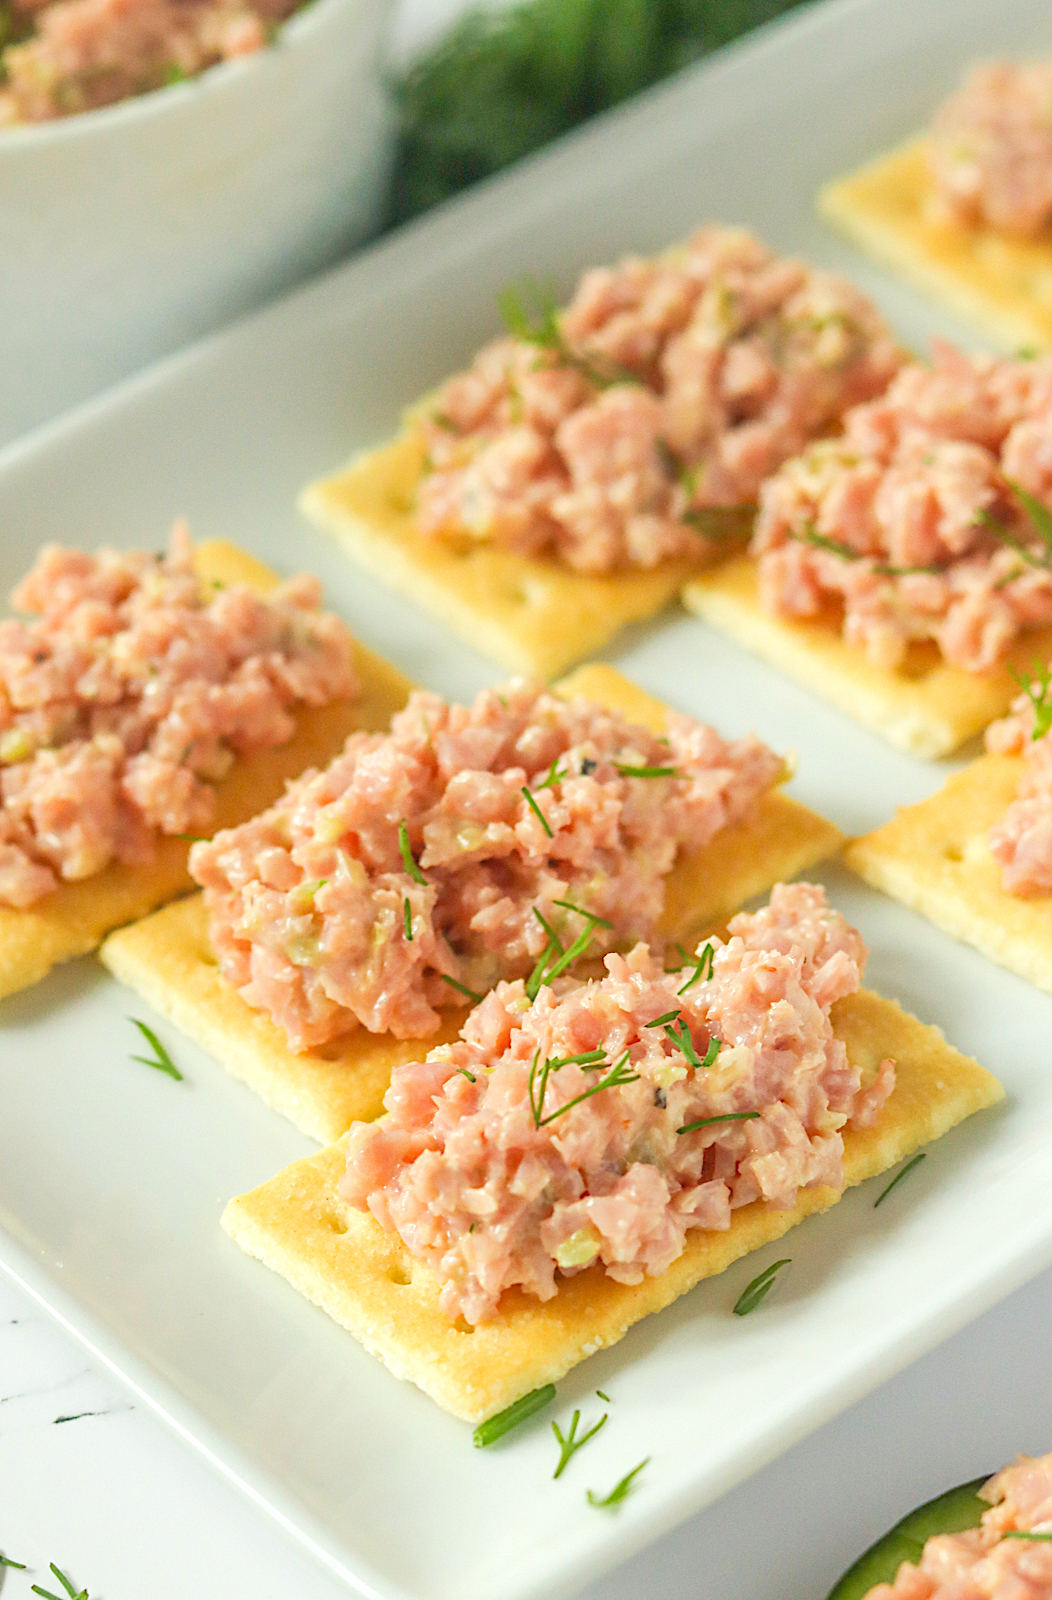 Deviled ham ramping up butter crackers for a great snack